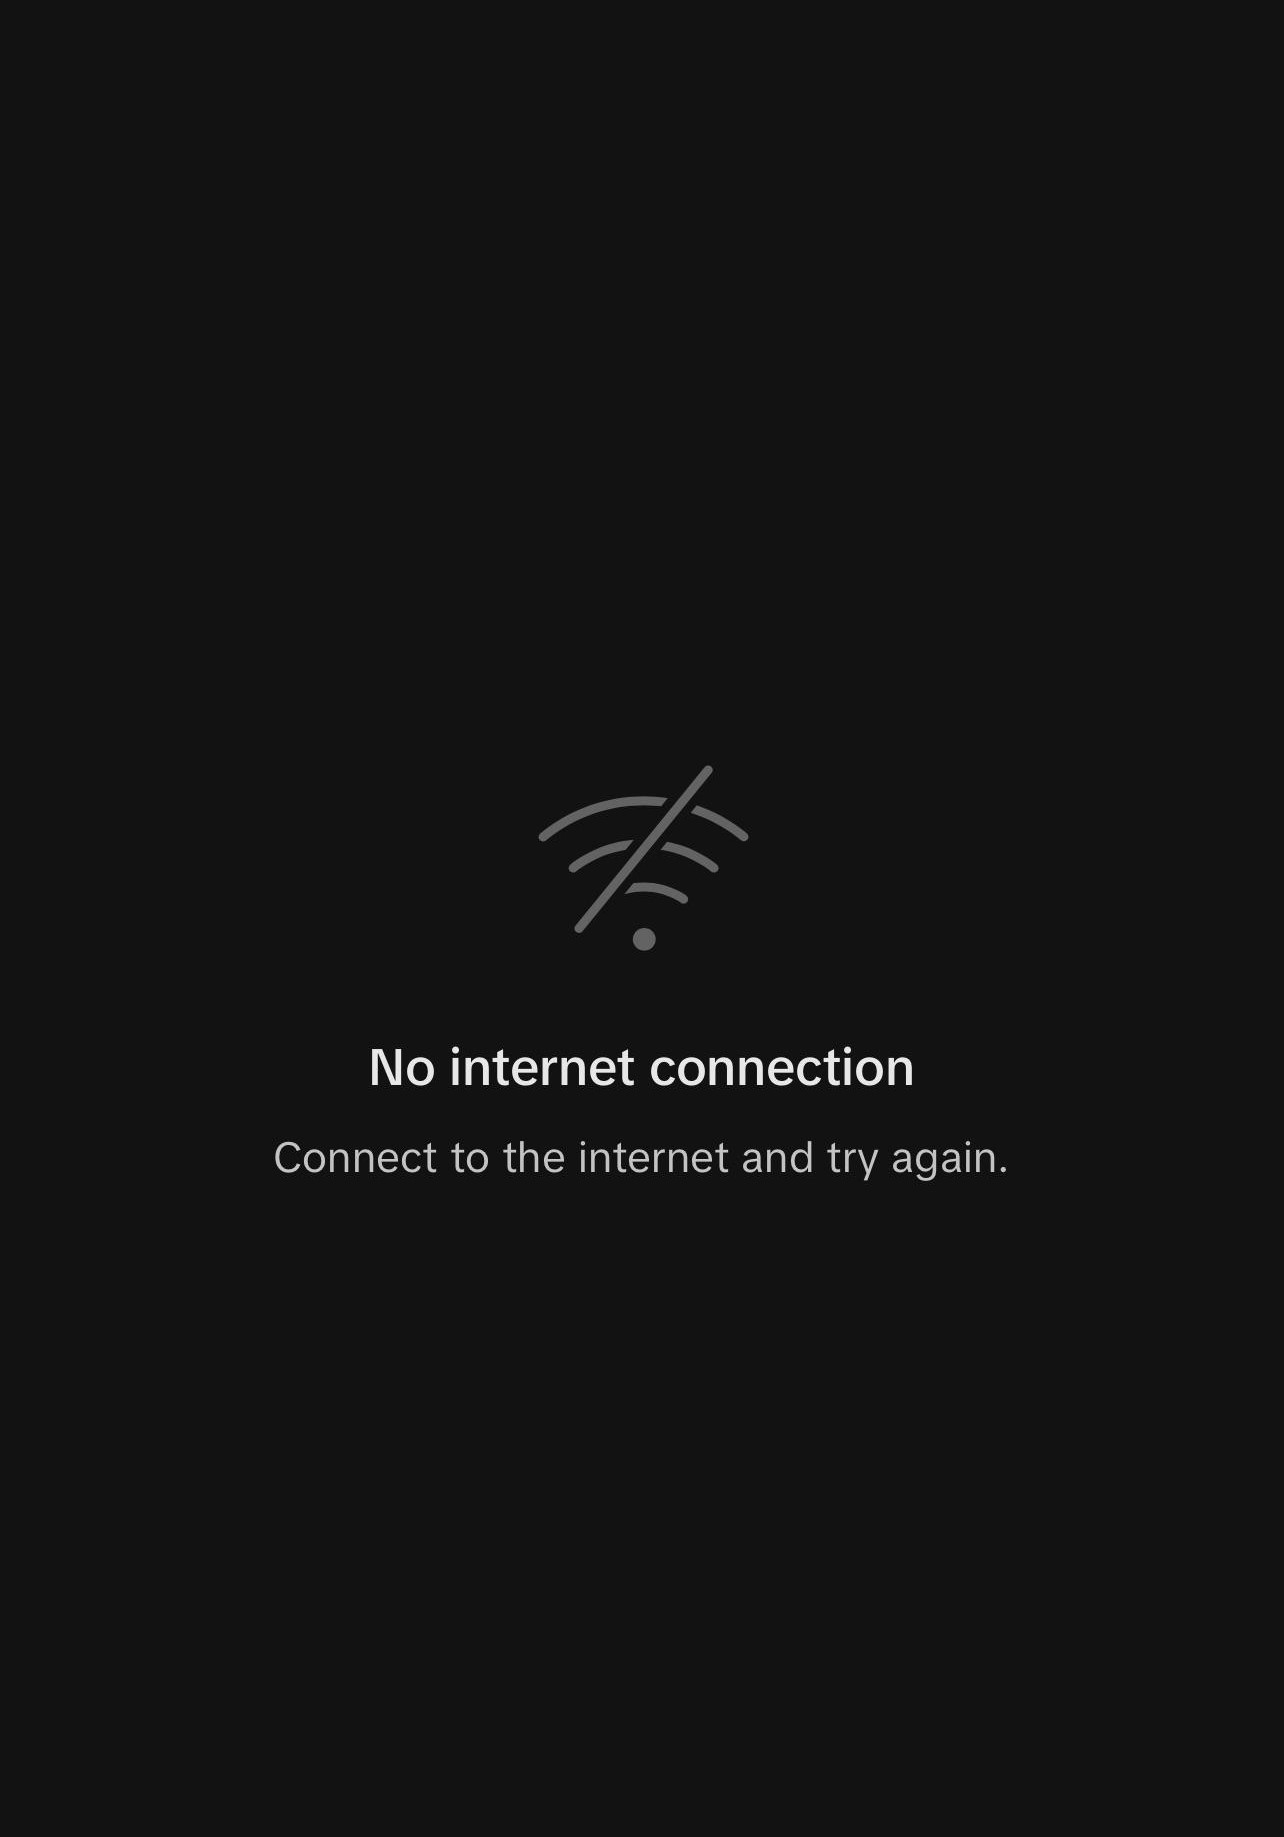 East Africa hit with widespread internet outages